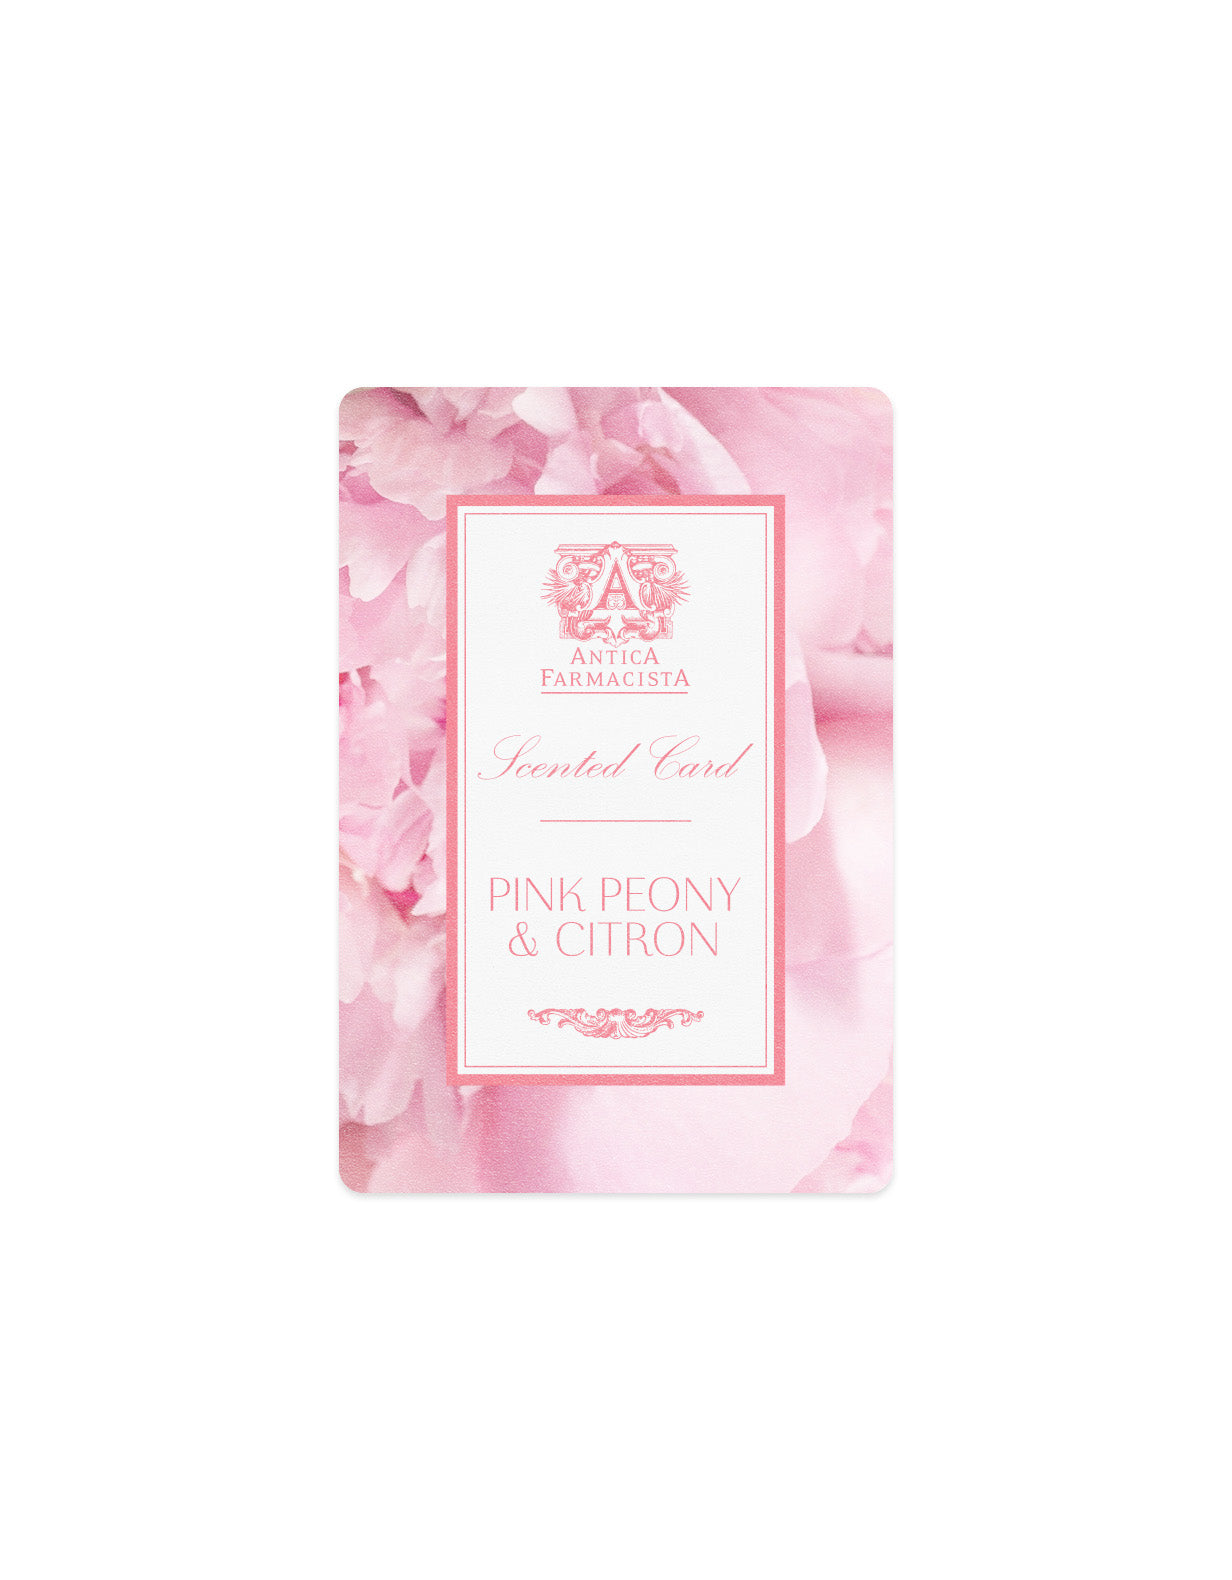 GWP - Scented Card - Pink Peony & Citron